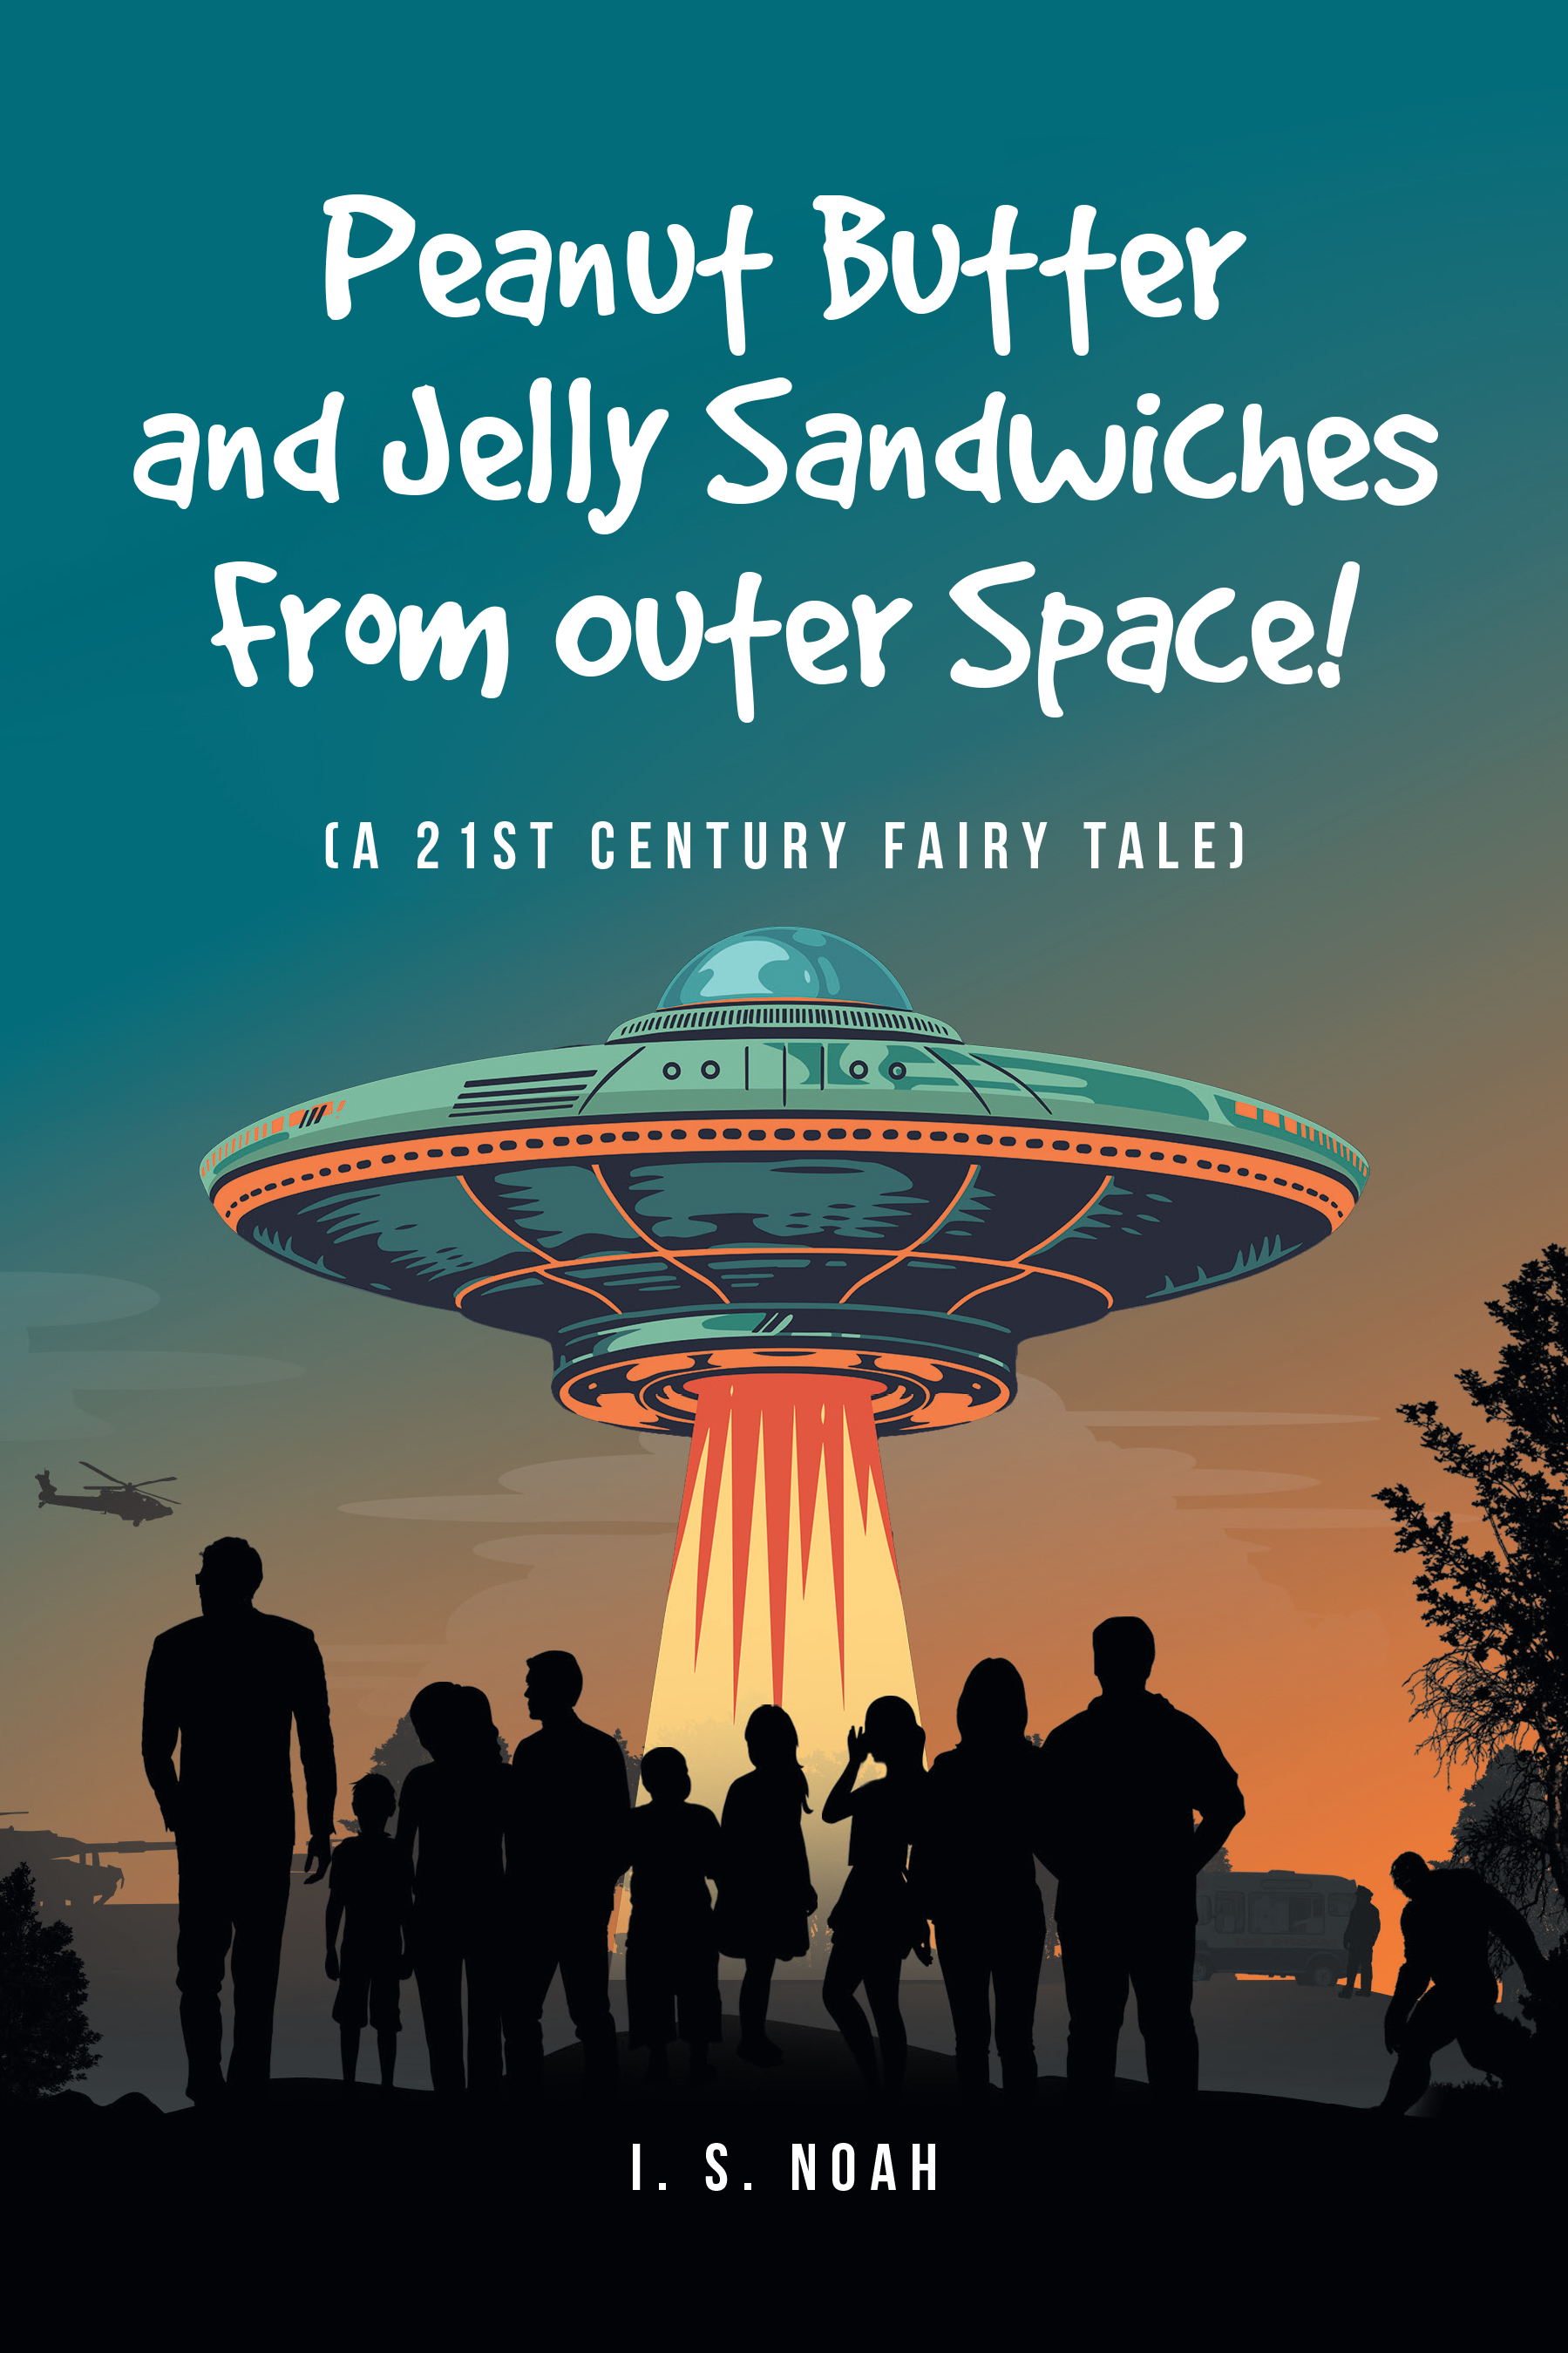 I. S. Noah’s New Book, "Peanut Butter and Jelly Sandwiches From Outer Space!" is a 21st-Century Fairytale Involving Aliens, Secret Agents, and Even a Sasquatch